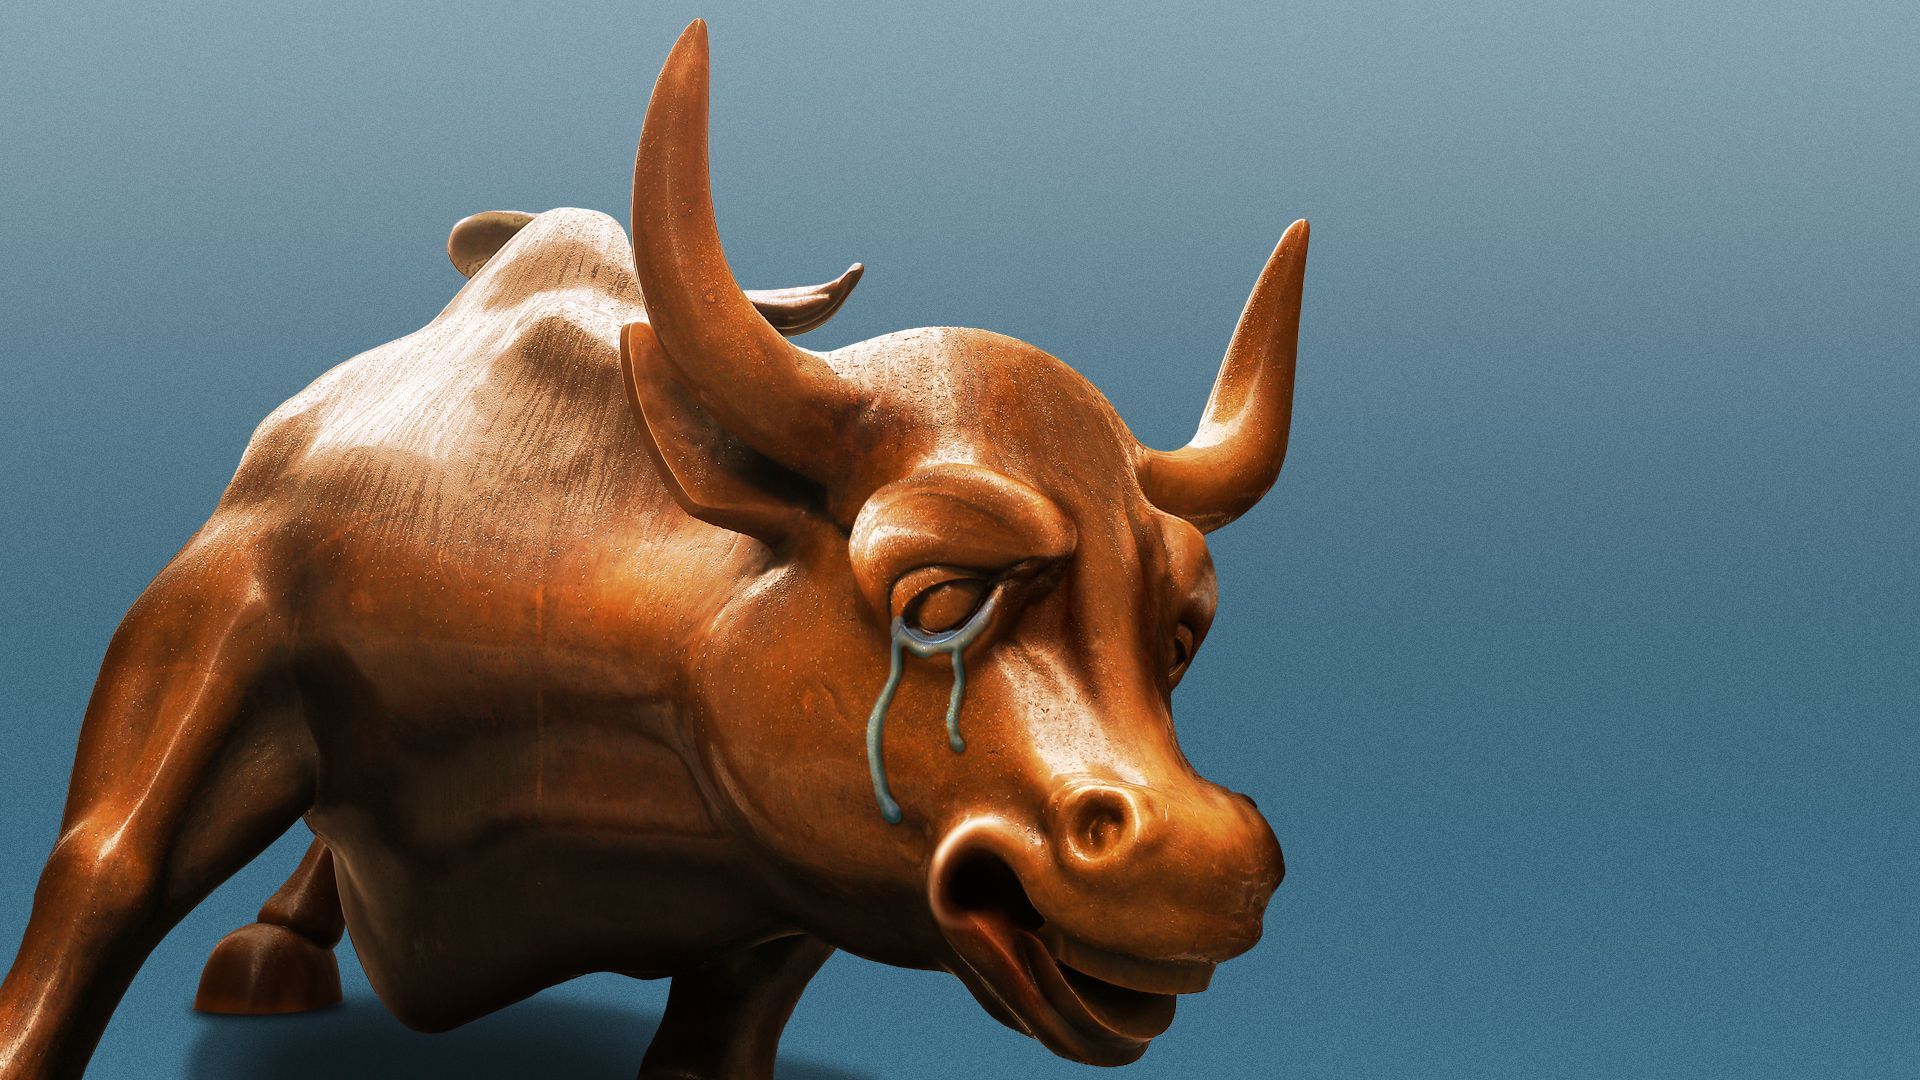 Illustration of the Wall Street Bull statue crying